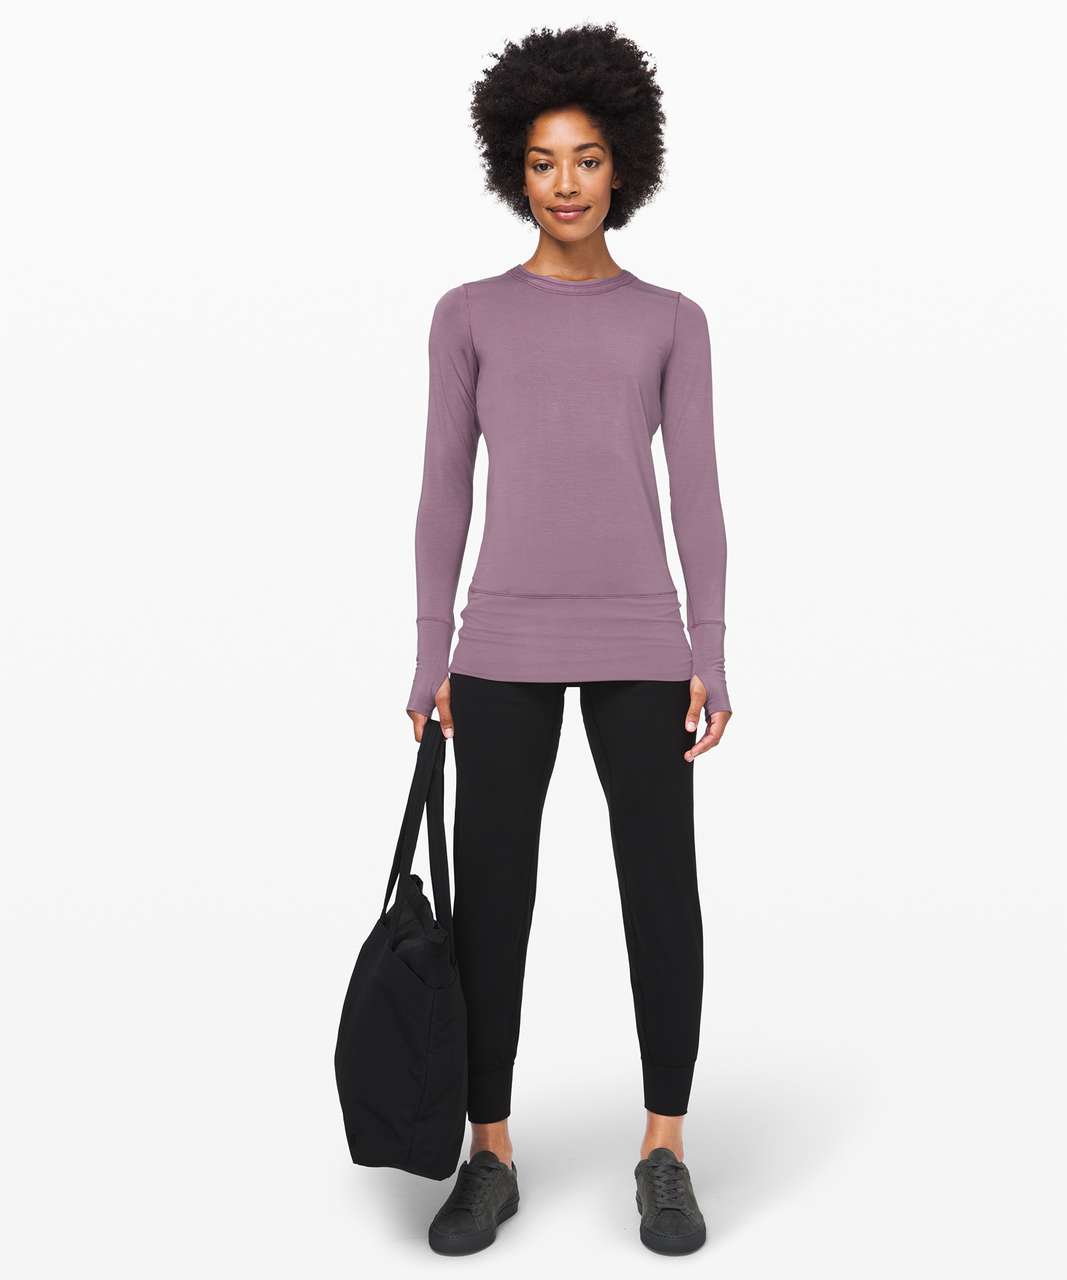 Lululemon Rule the Day Long Sleeve - Frosted Mulberry